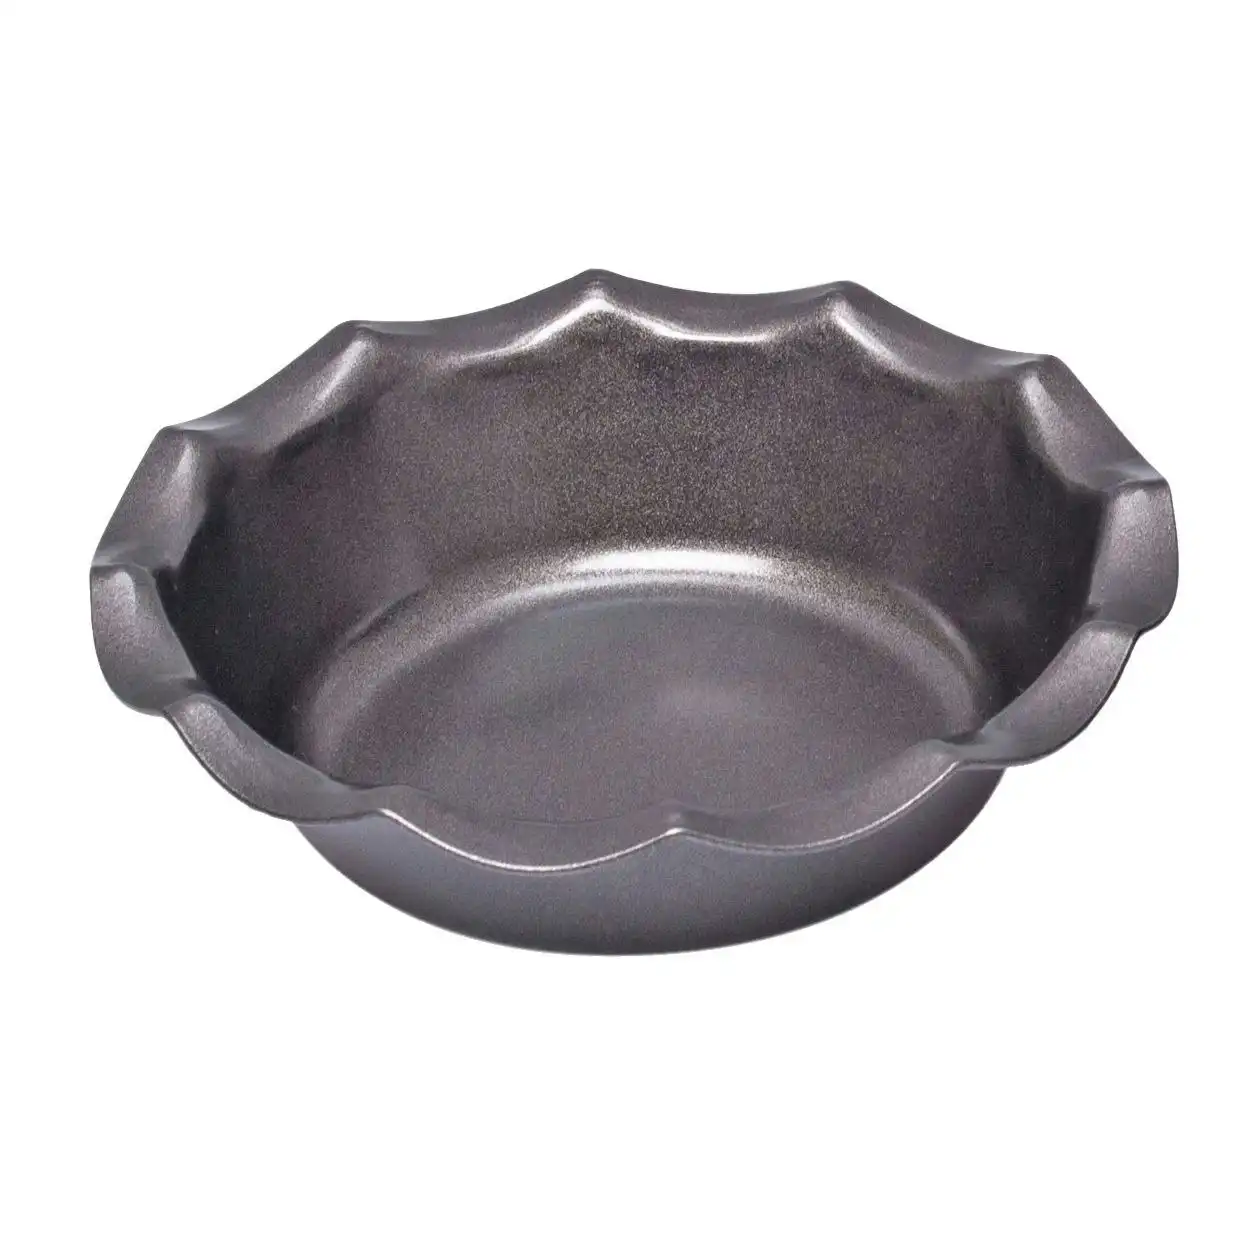 Daily Bake 12cm x 2.5cm NON STICK FLUTED PIE DISH - SET OF 6